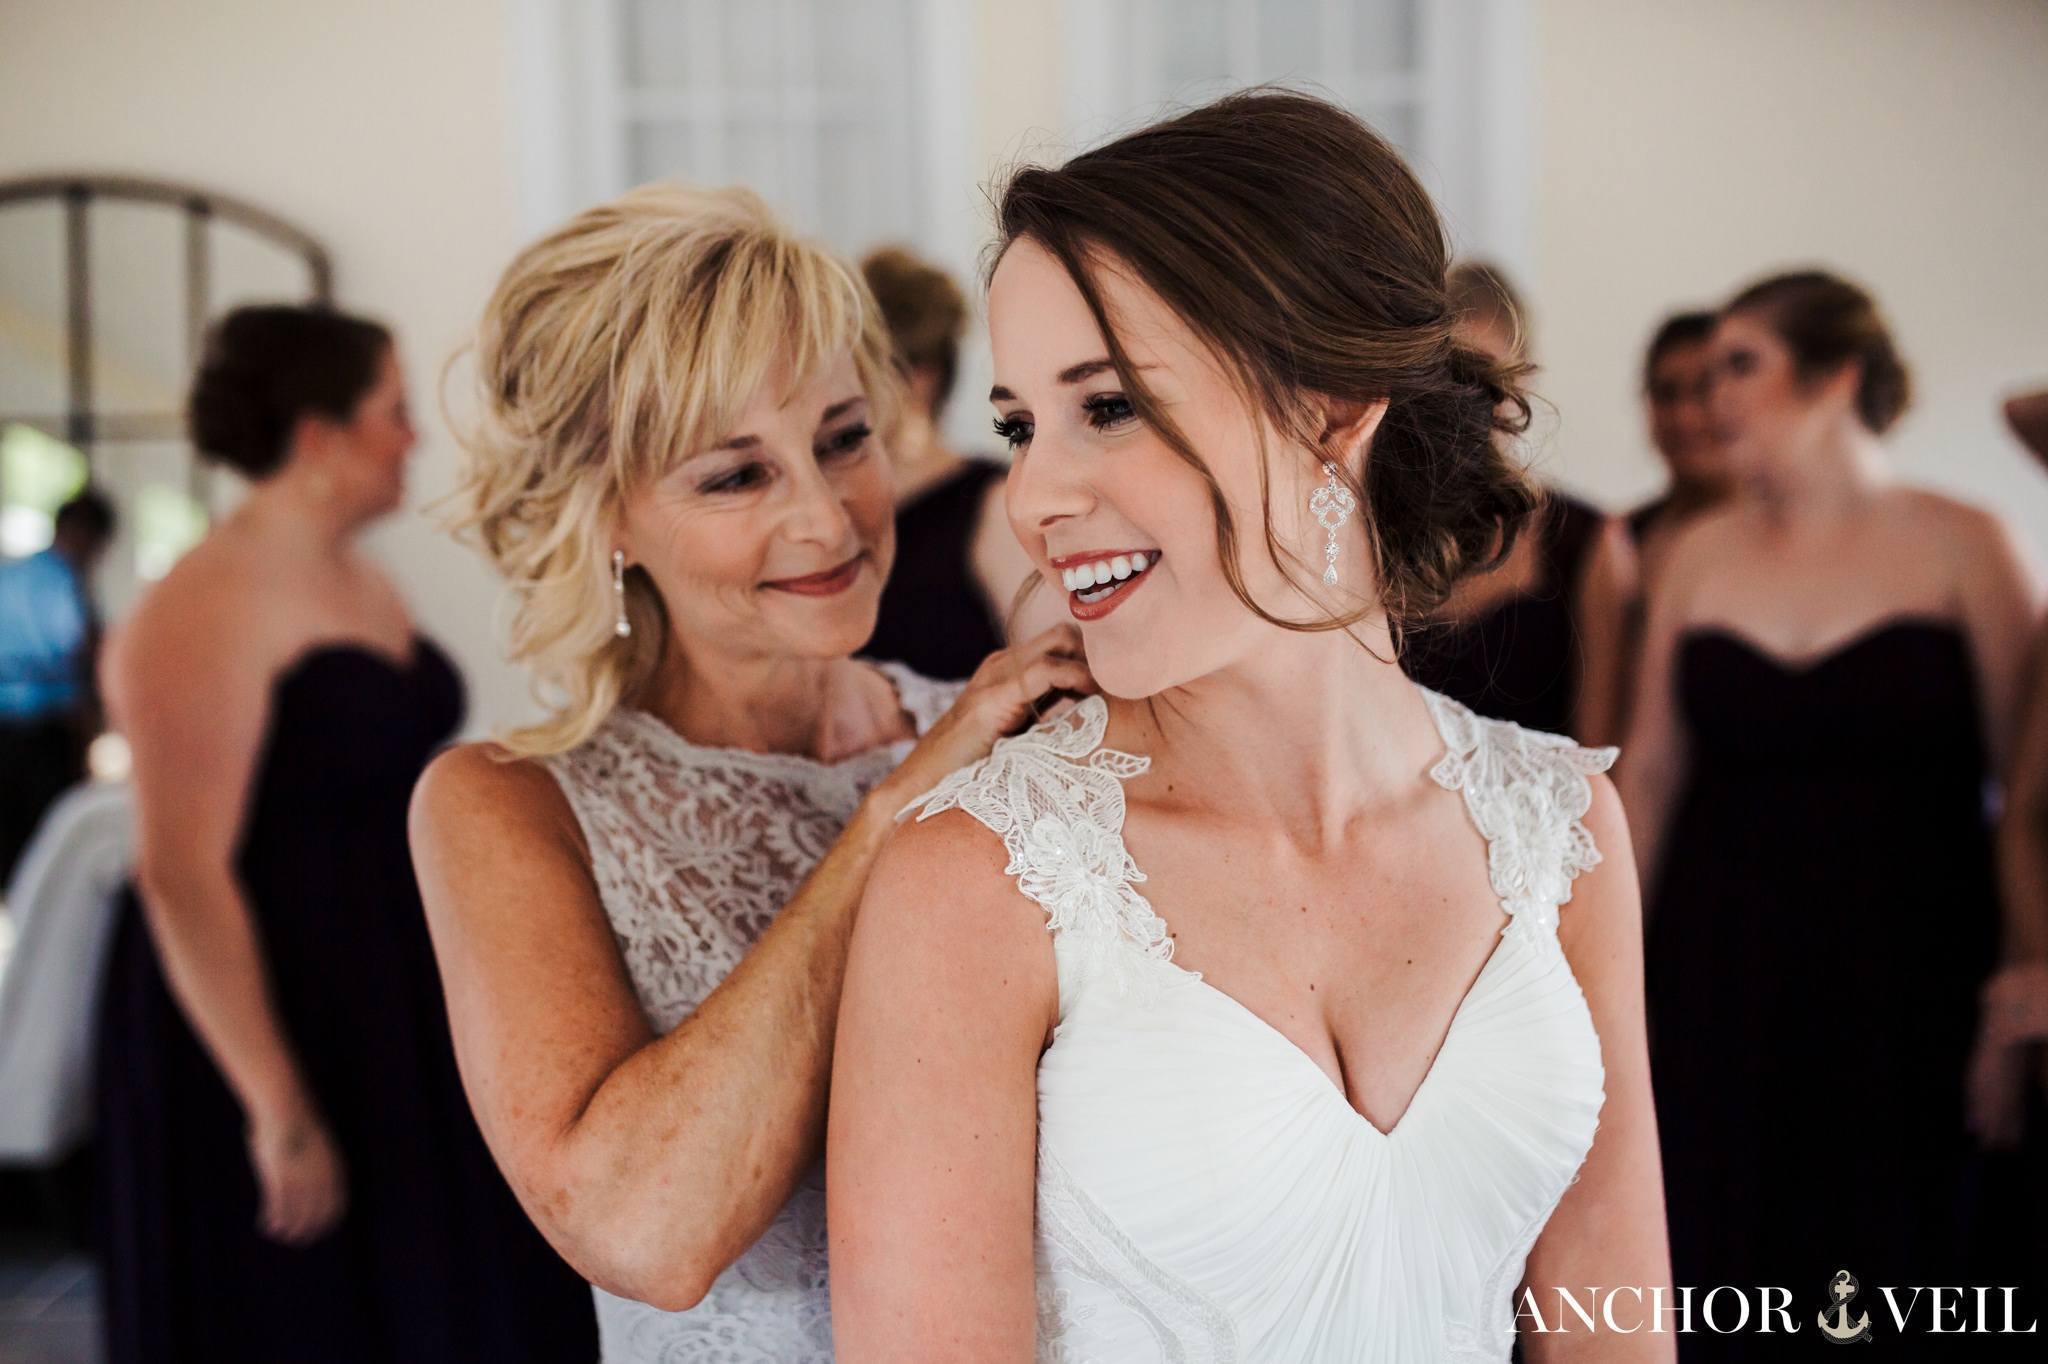 brides mom helping her put the dress on